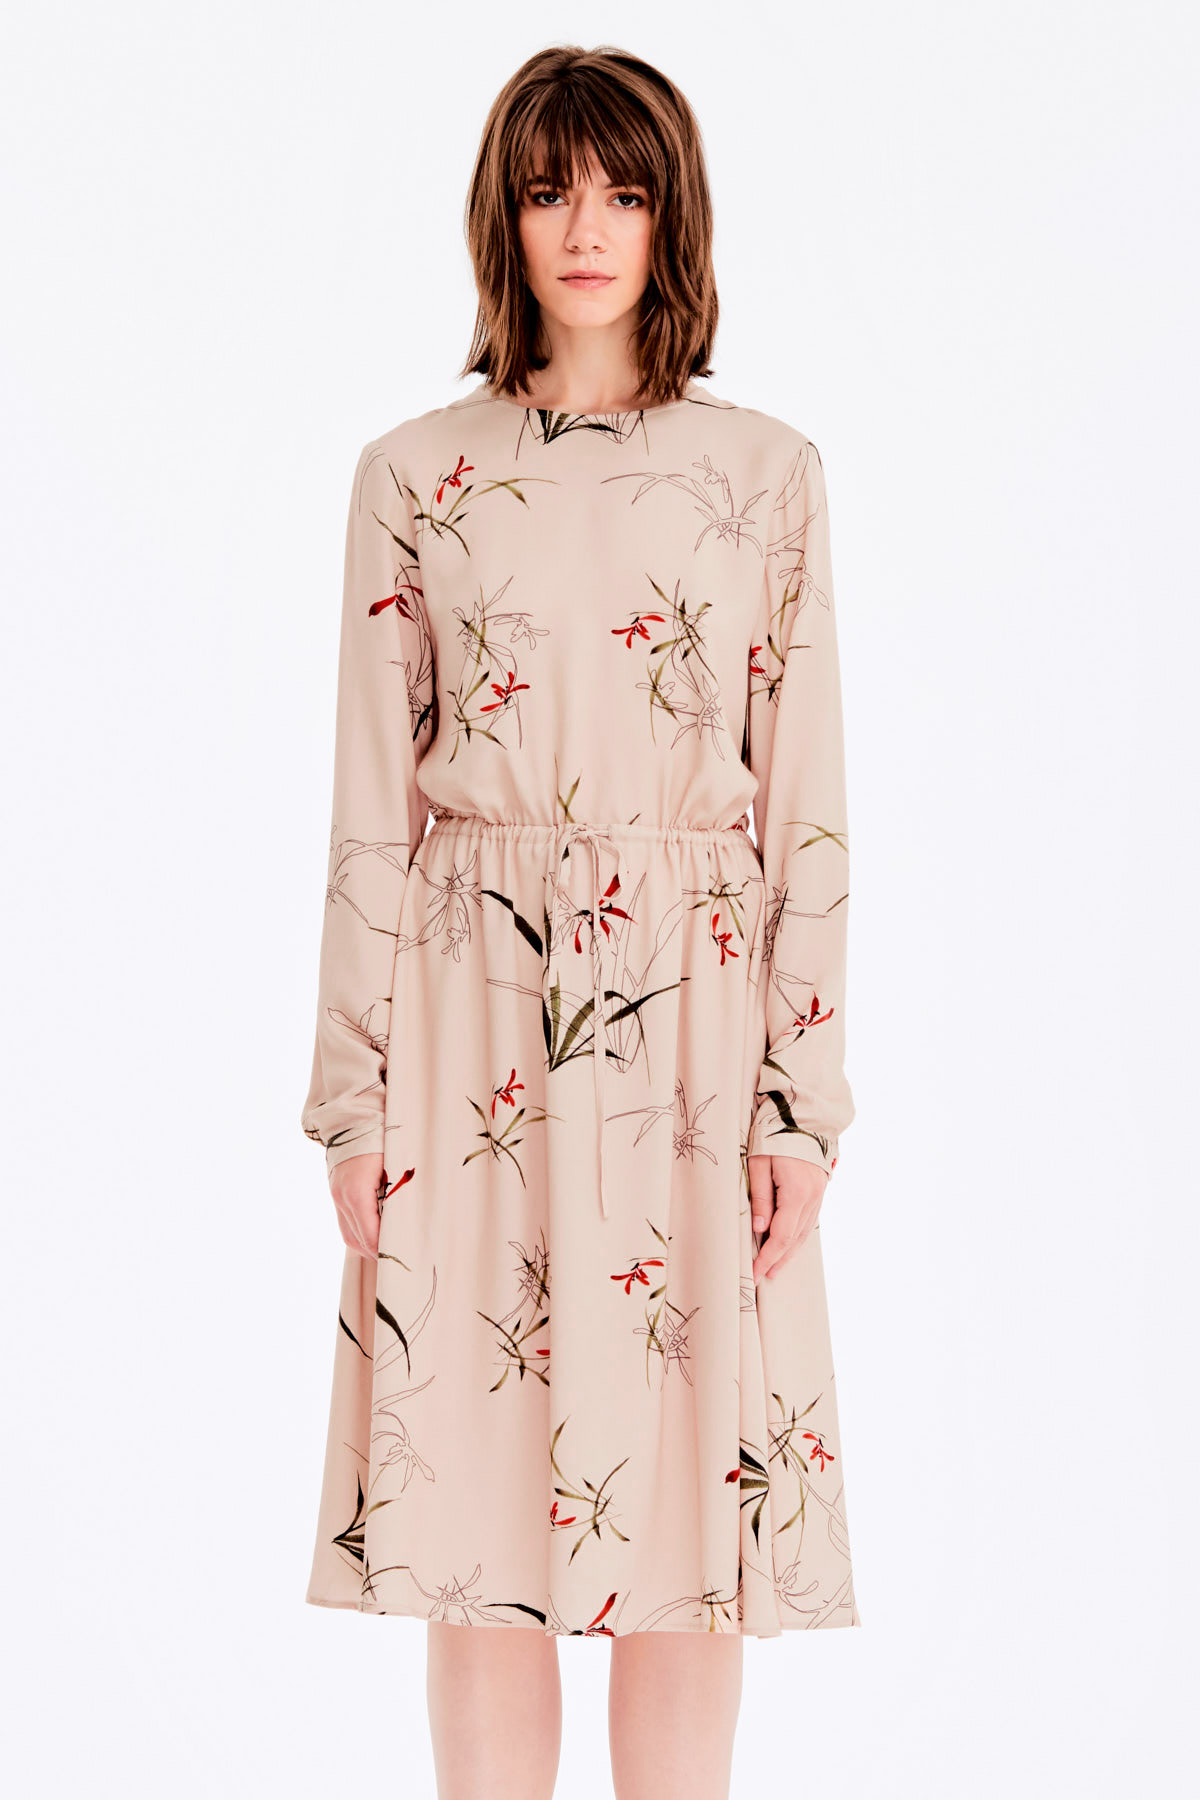 Beige dress with a floral print and ties, photo 1